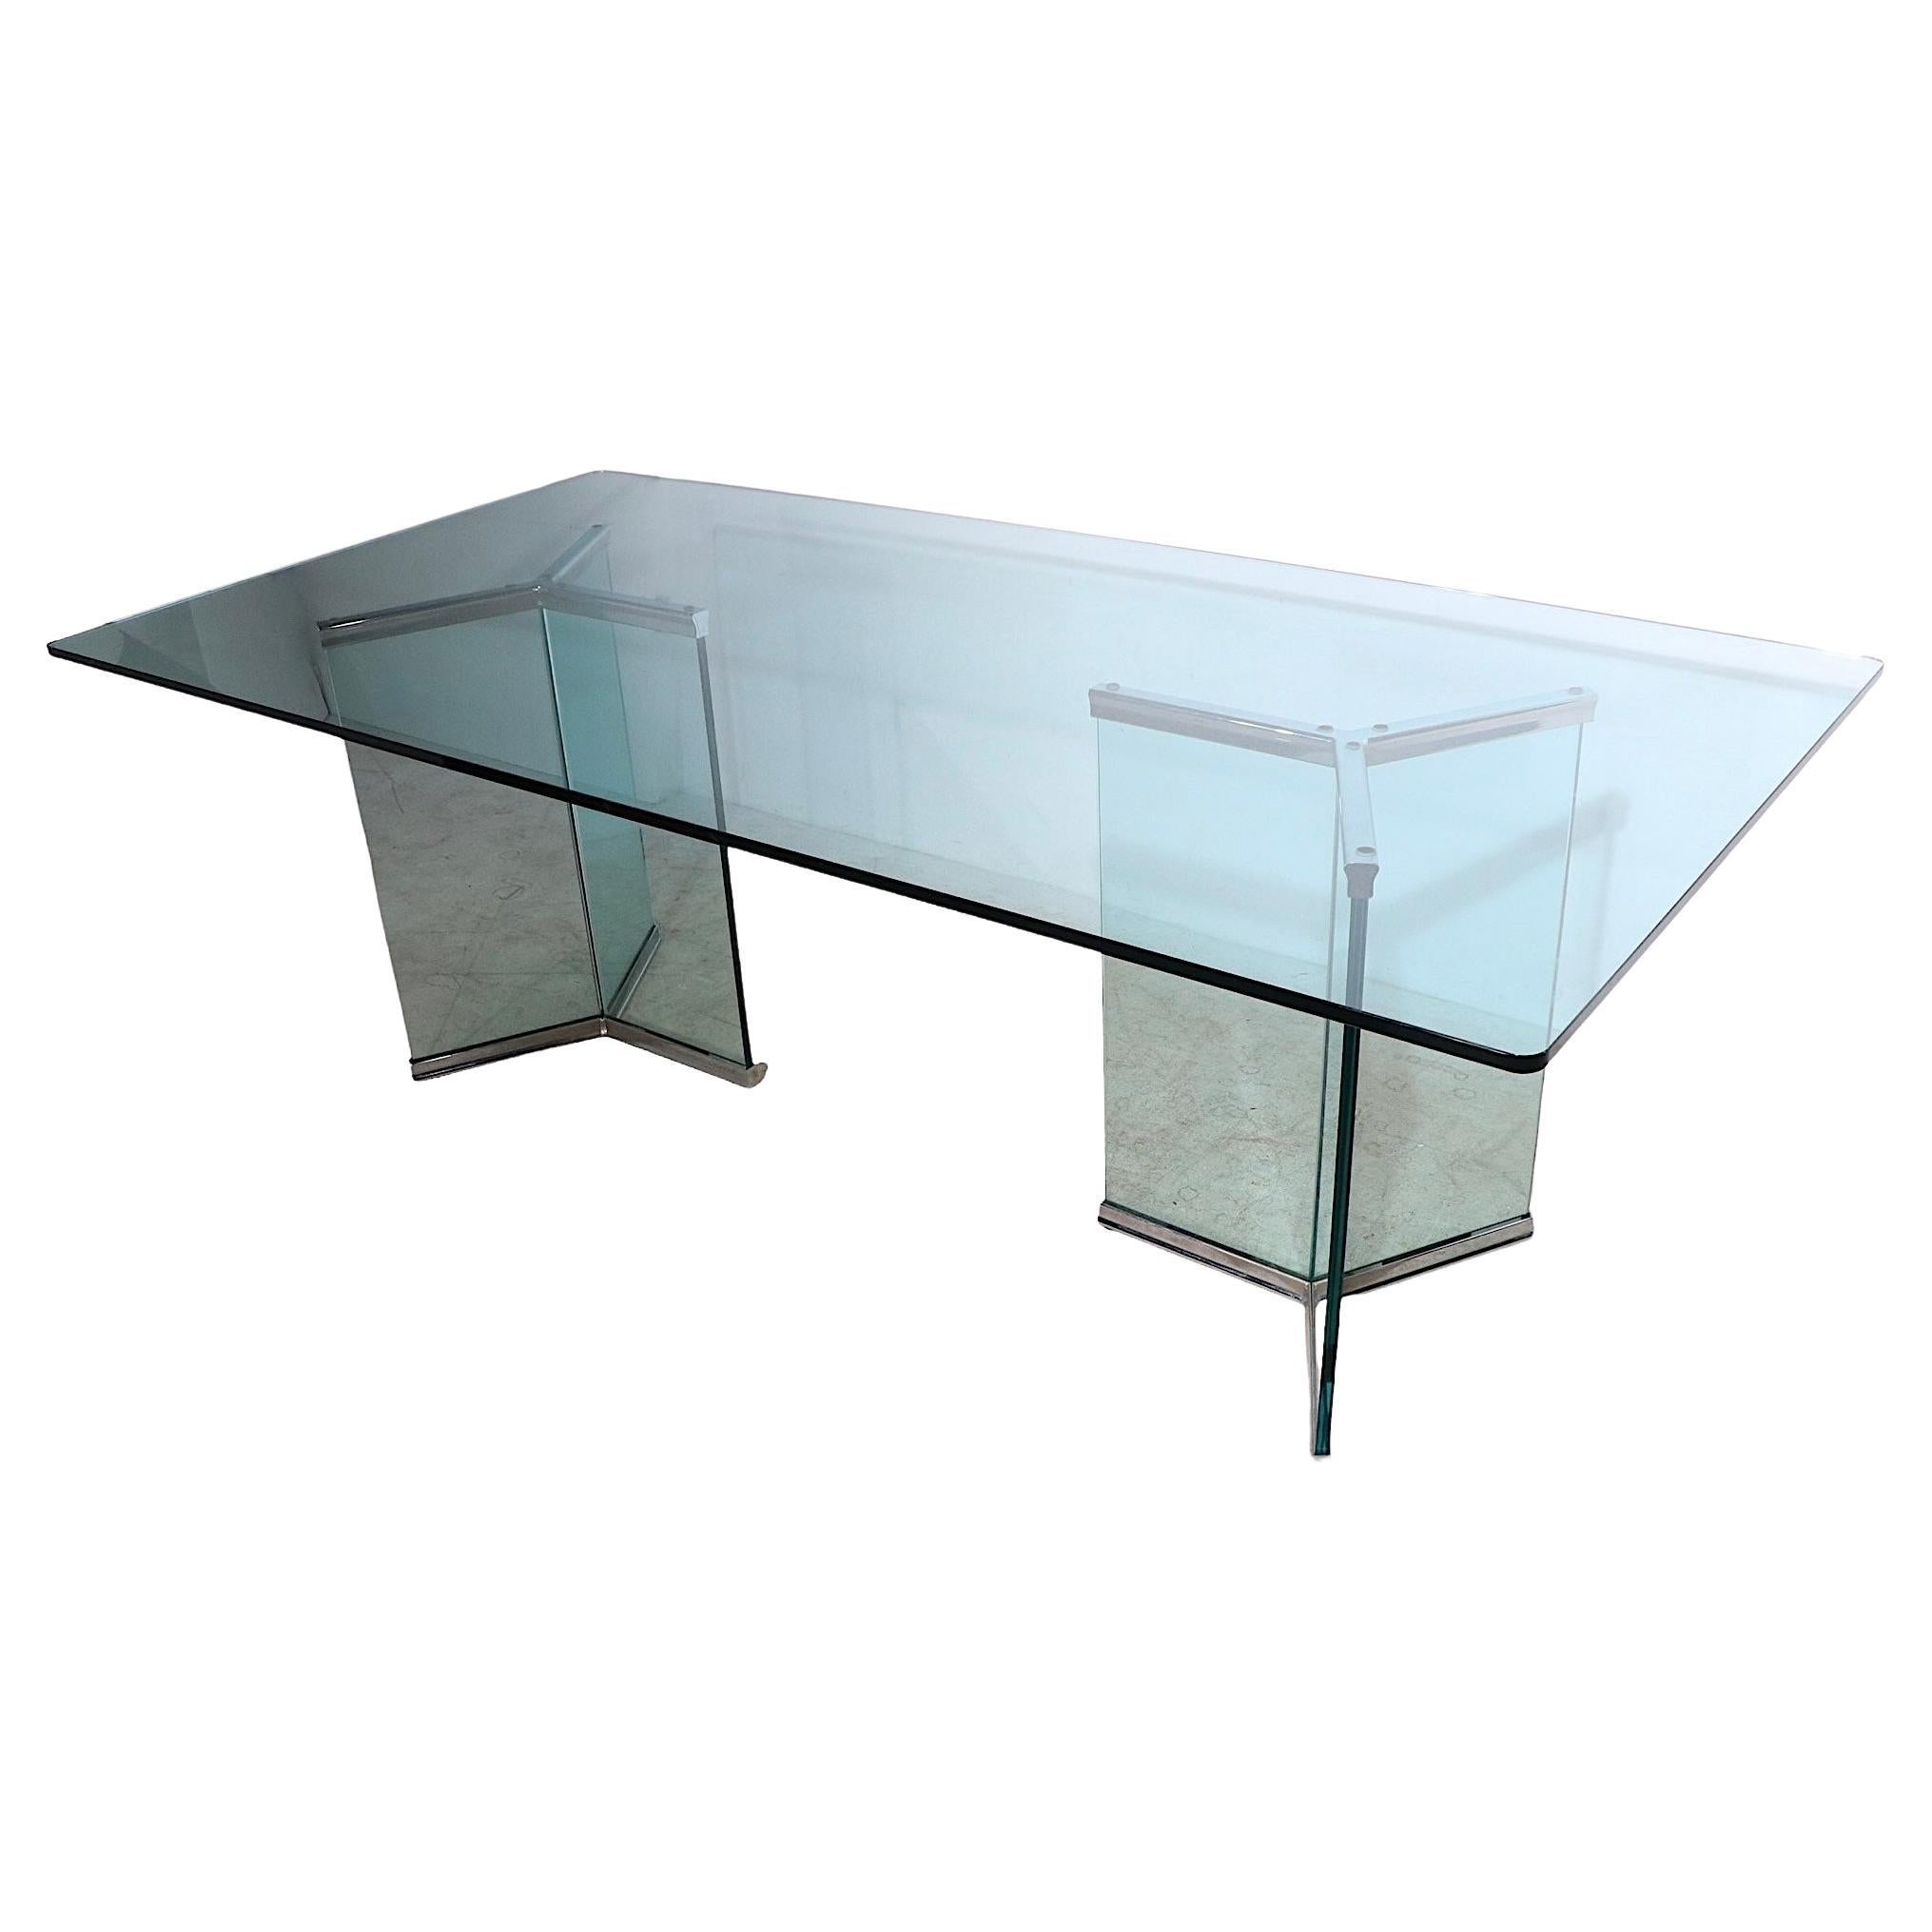 Massive glass on glass dining, conference table designed by Irving Rosen, for Pace Collection, circa 1970's. The table features a large ( 84 x 42 x .75 inch ) rectangular top, which rests on two glass and chrome supports, each also constructed of